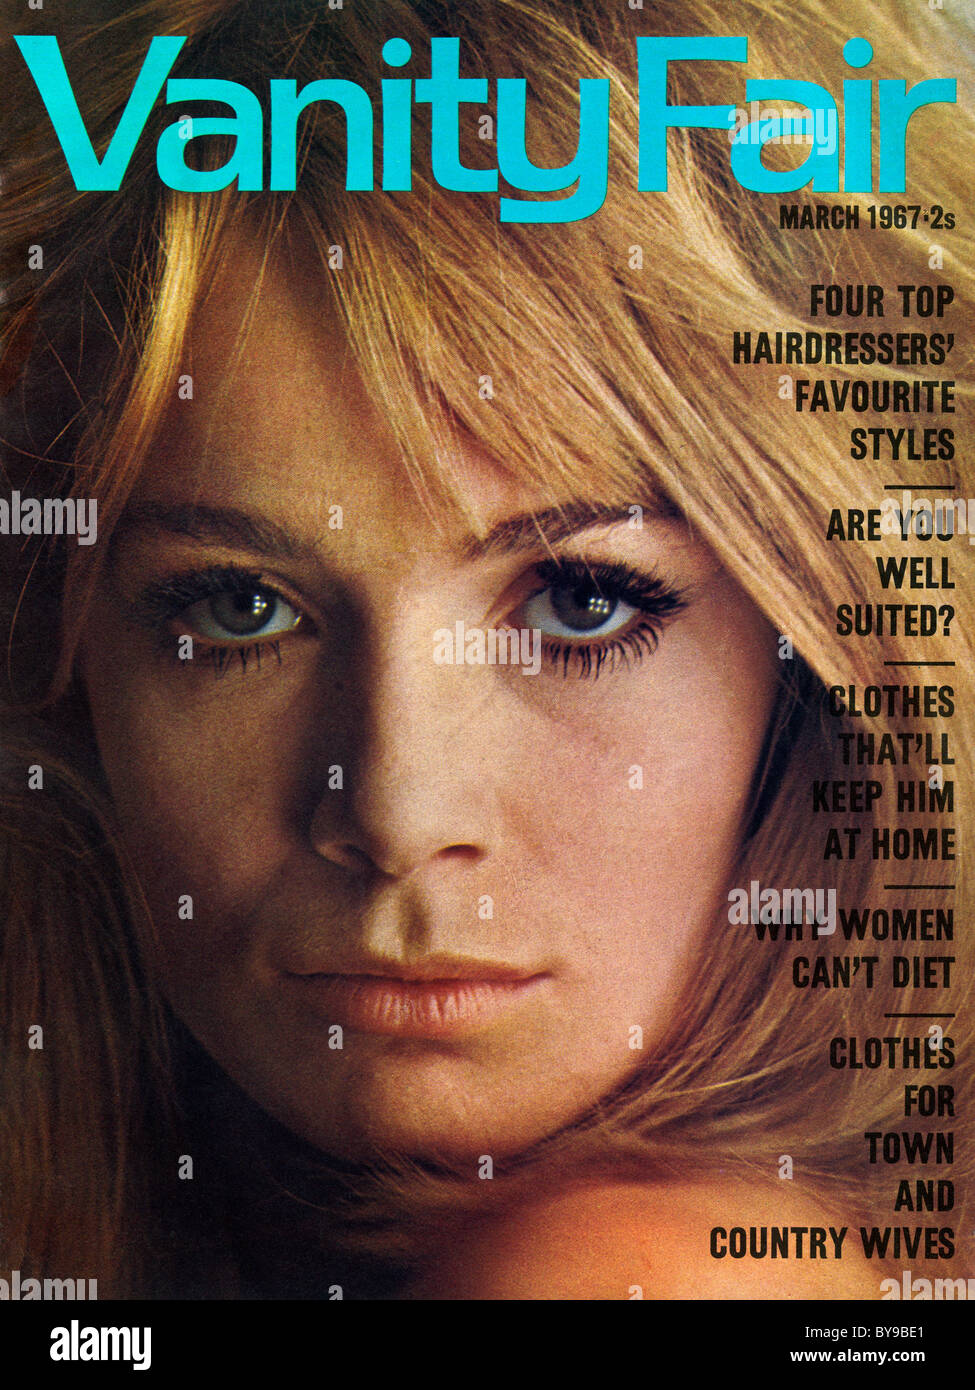 Cover of VANITY FAIR magazine dated March 1967 priced at 2 shillings swinging sixties Stock Photo